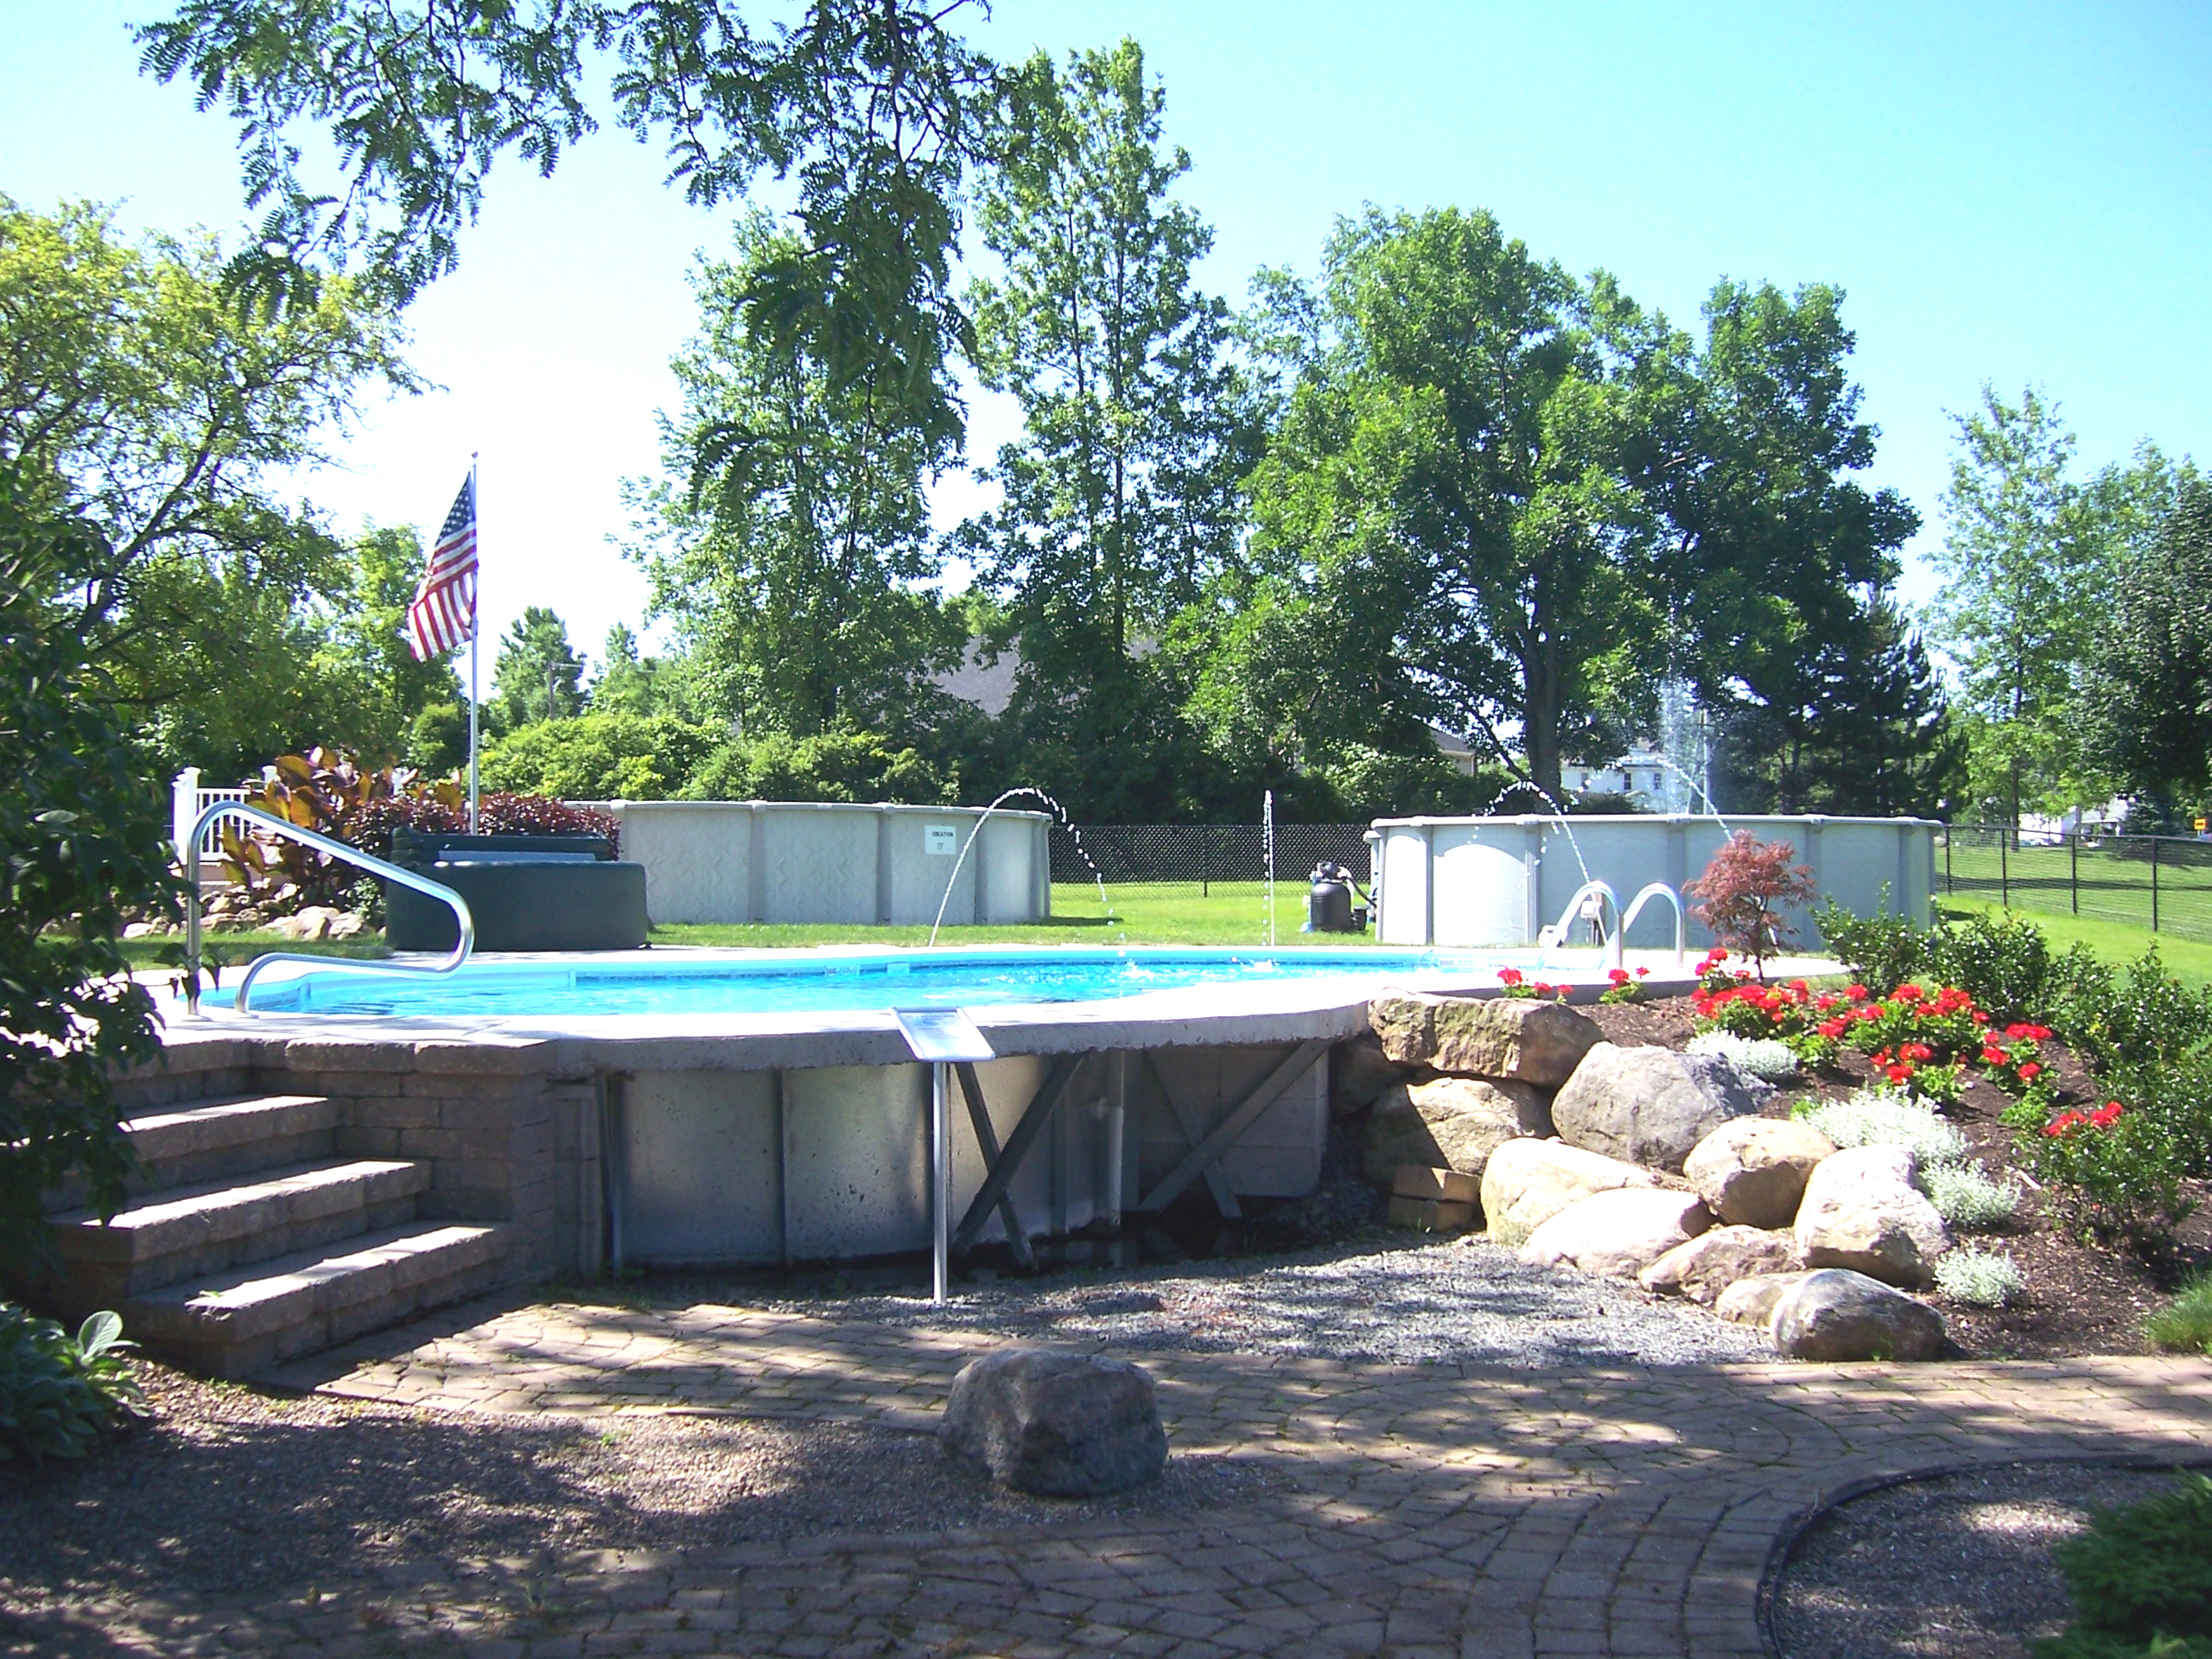 Pettis Pools Patio Pool Park Is One Of A Kind Pettis Pools Patio